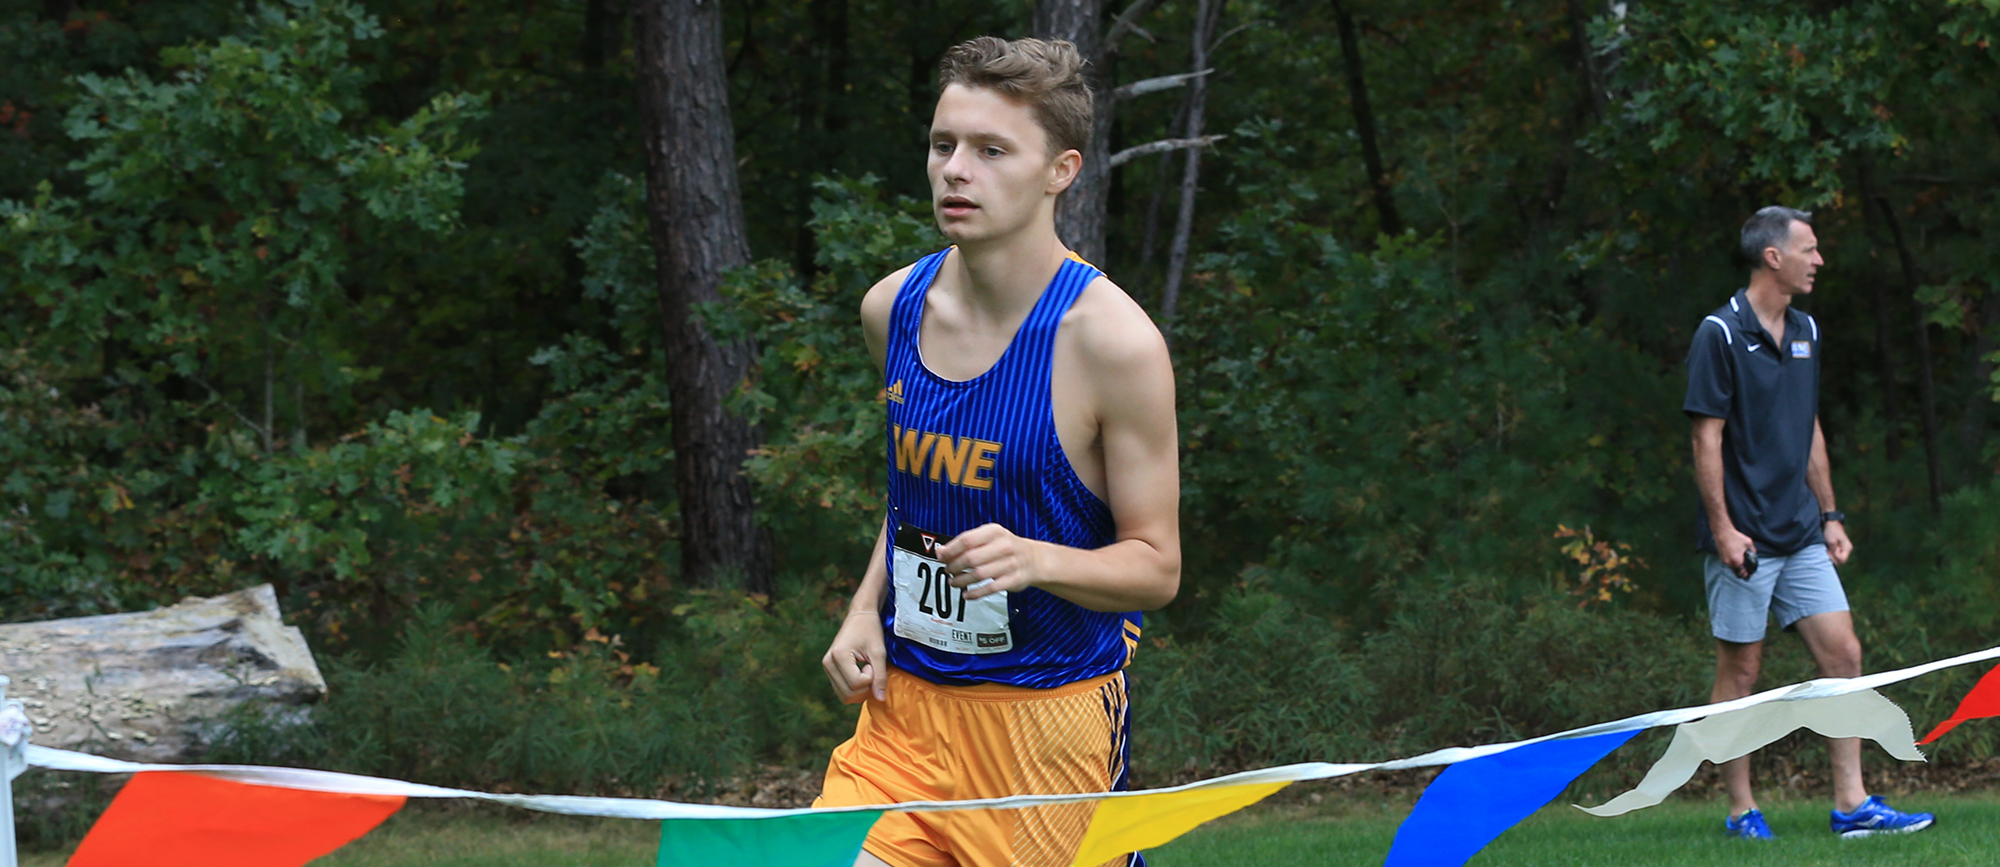 Adam Monroe finished 12th overall as the Golden Bears won the team title at the Elms Blazer Classic on Saturday. (Photo by Doug Steinbock)